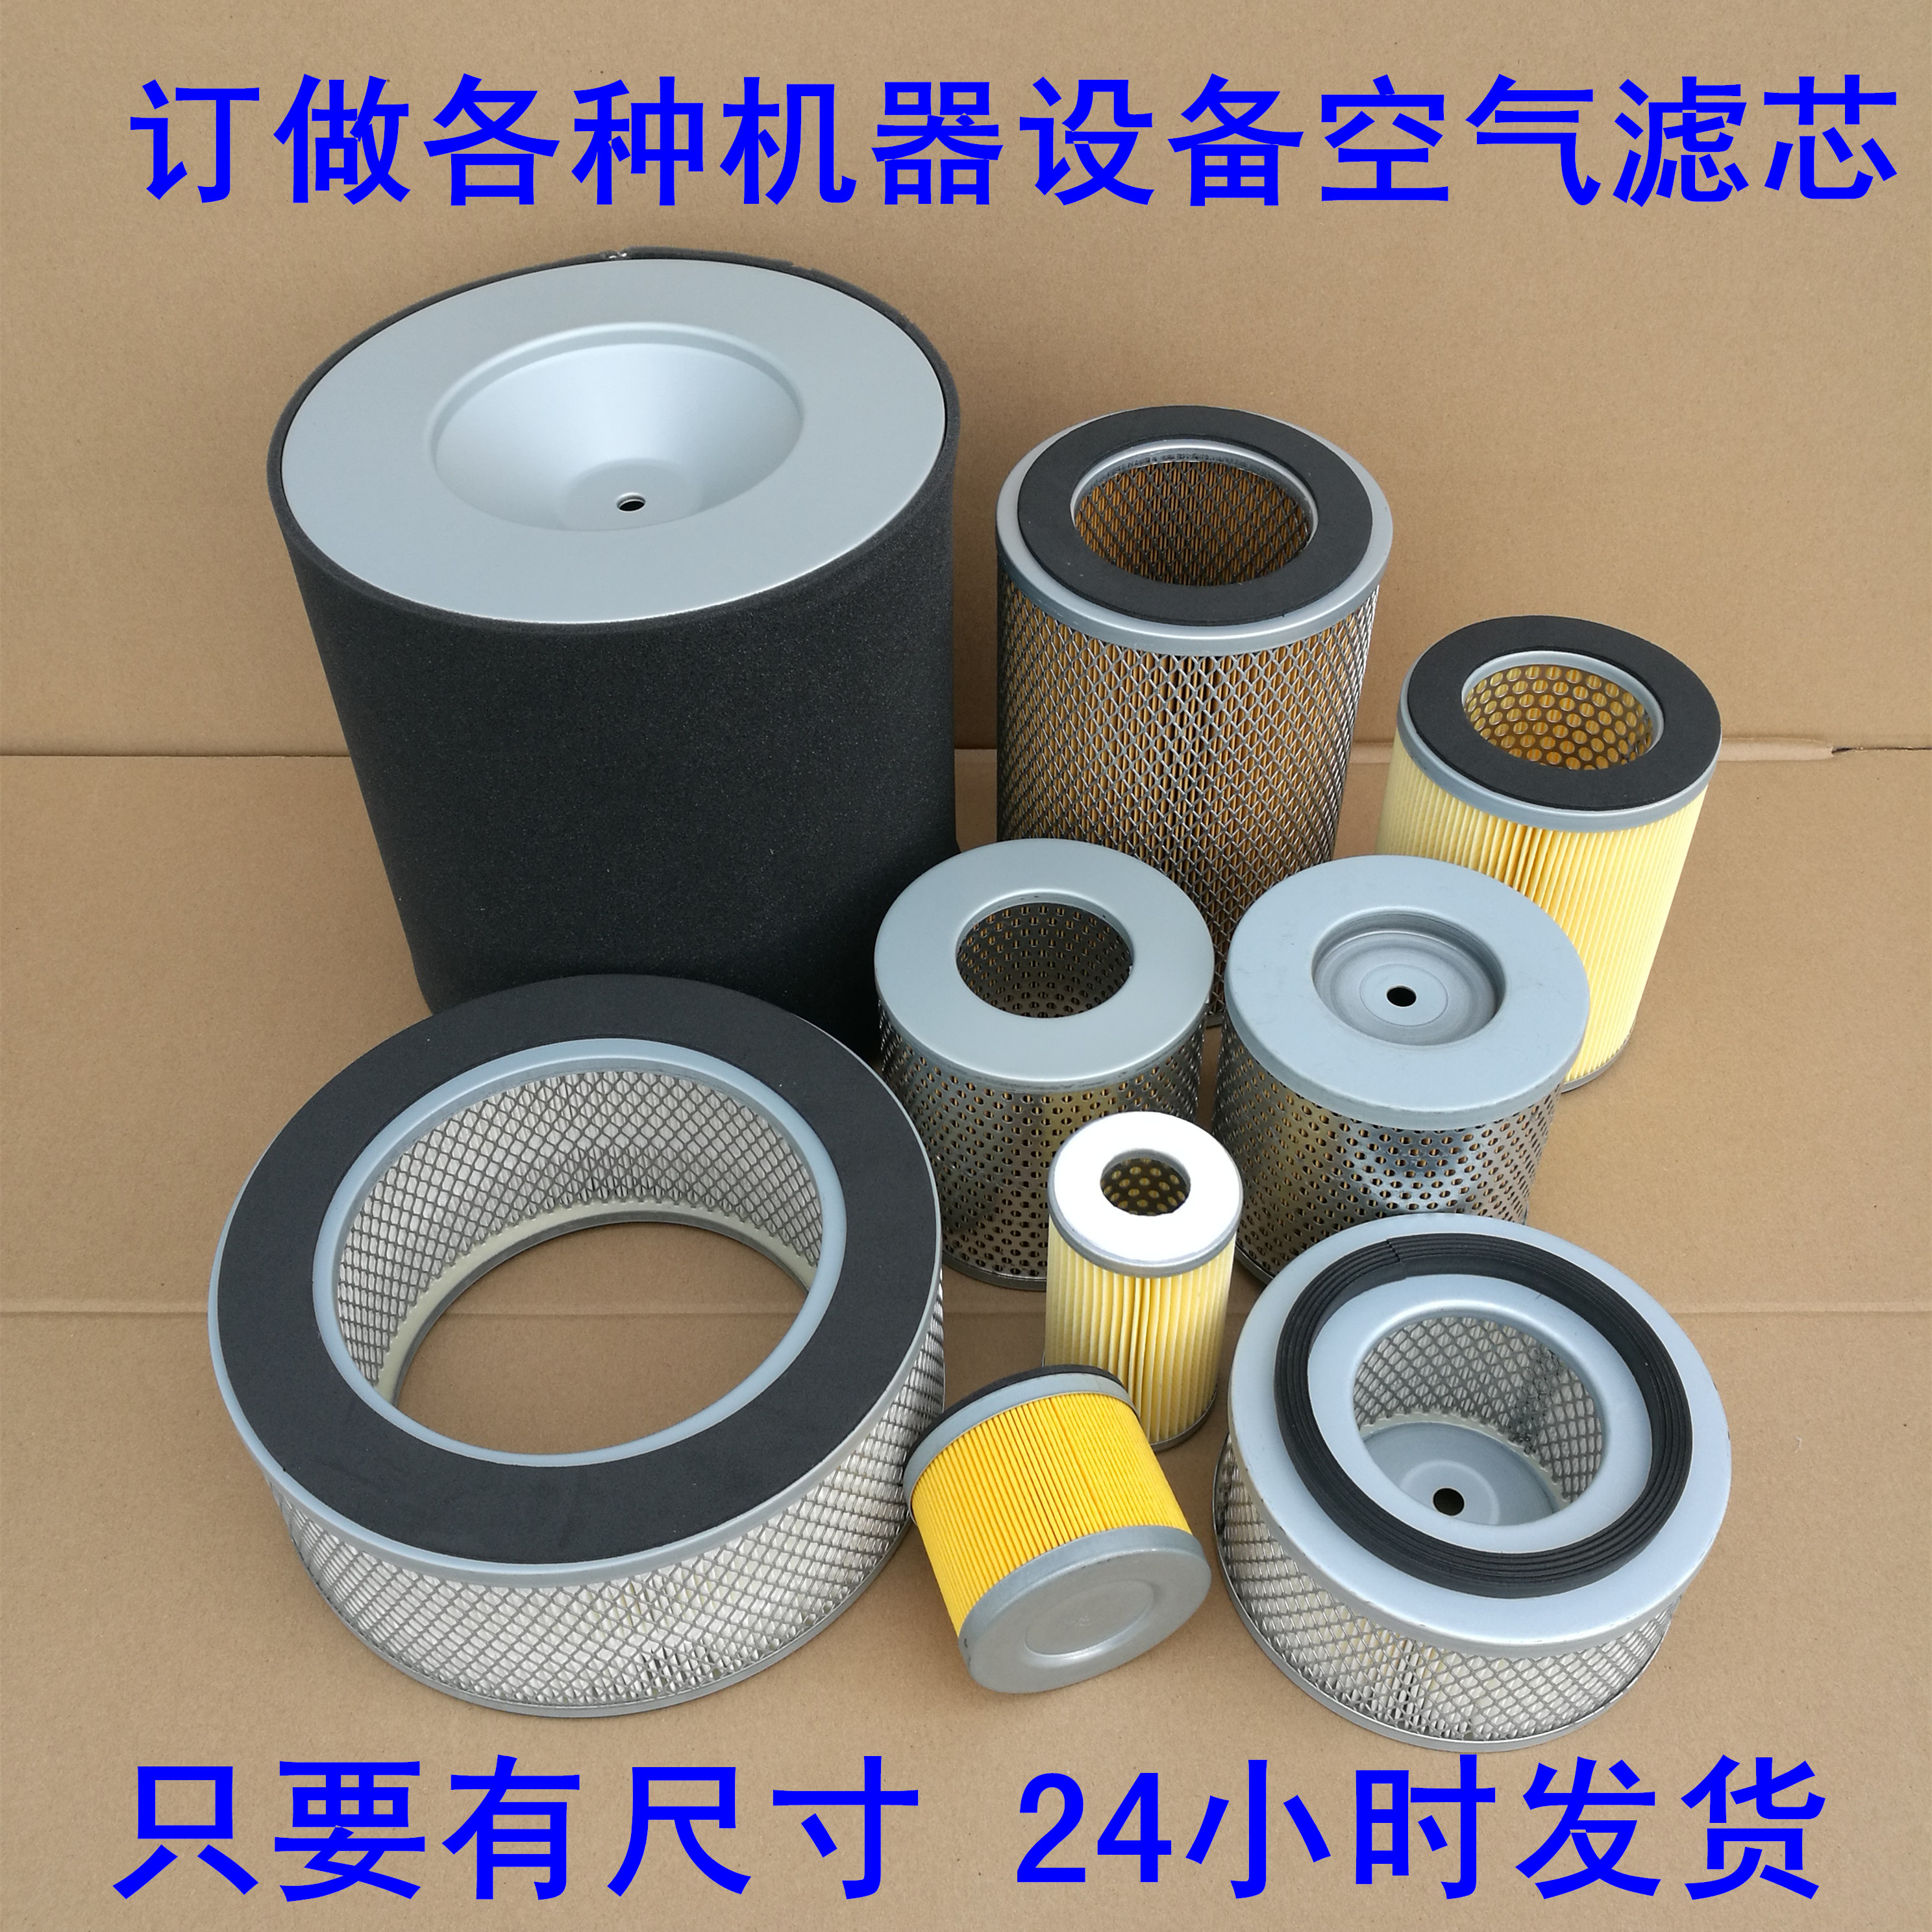 Replacement of Air Compressor Filters